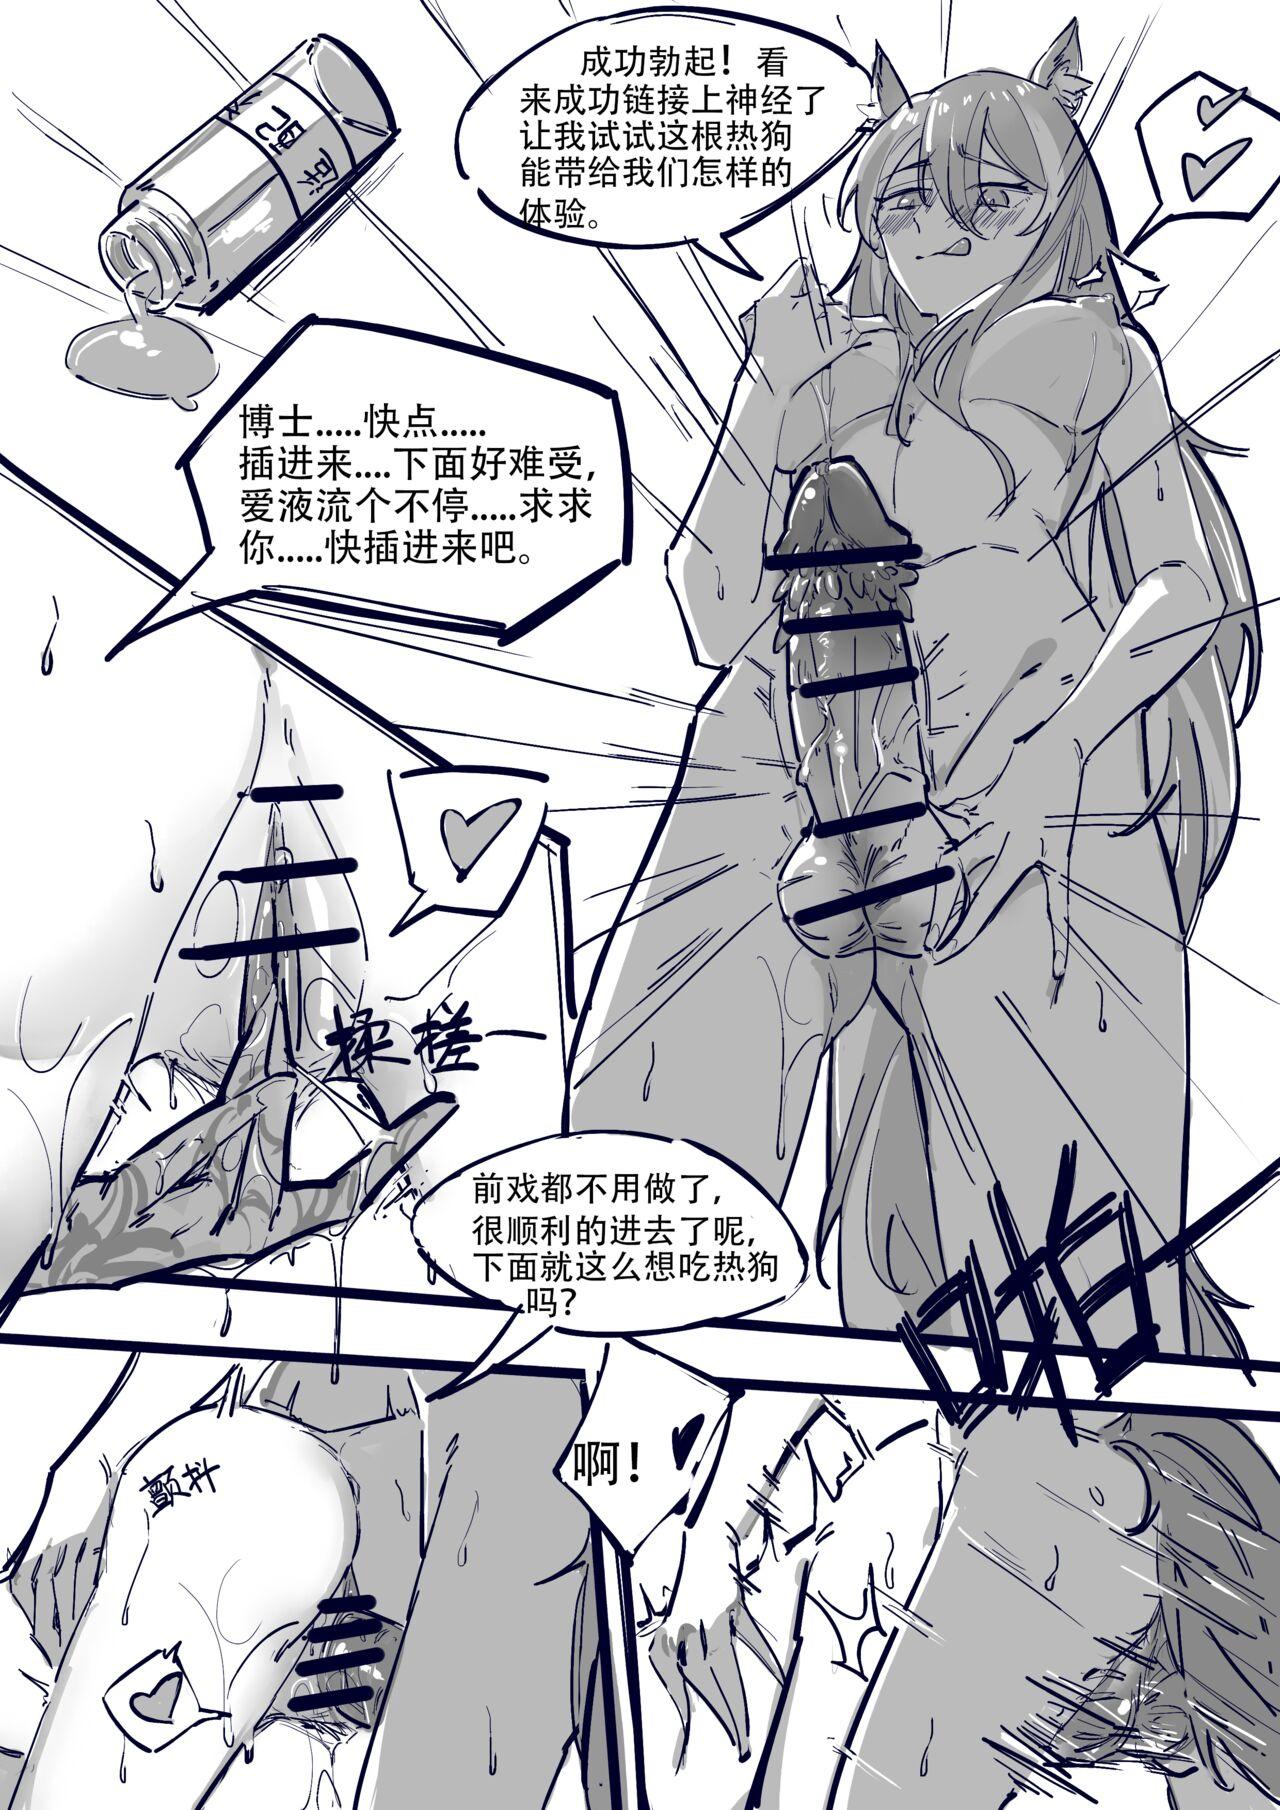 Tight Cunt 博士大战龙泡泡（上篇） - Arknights Big - Page 6